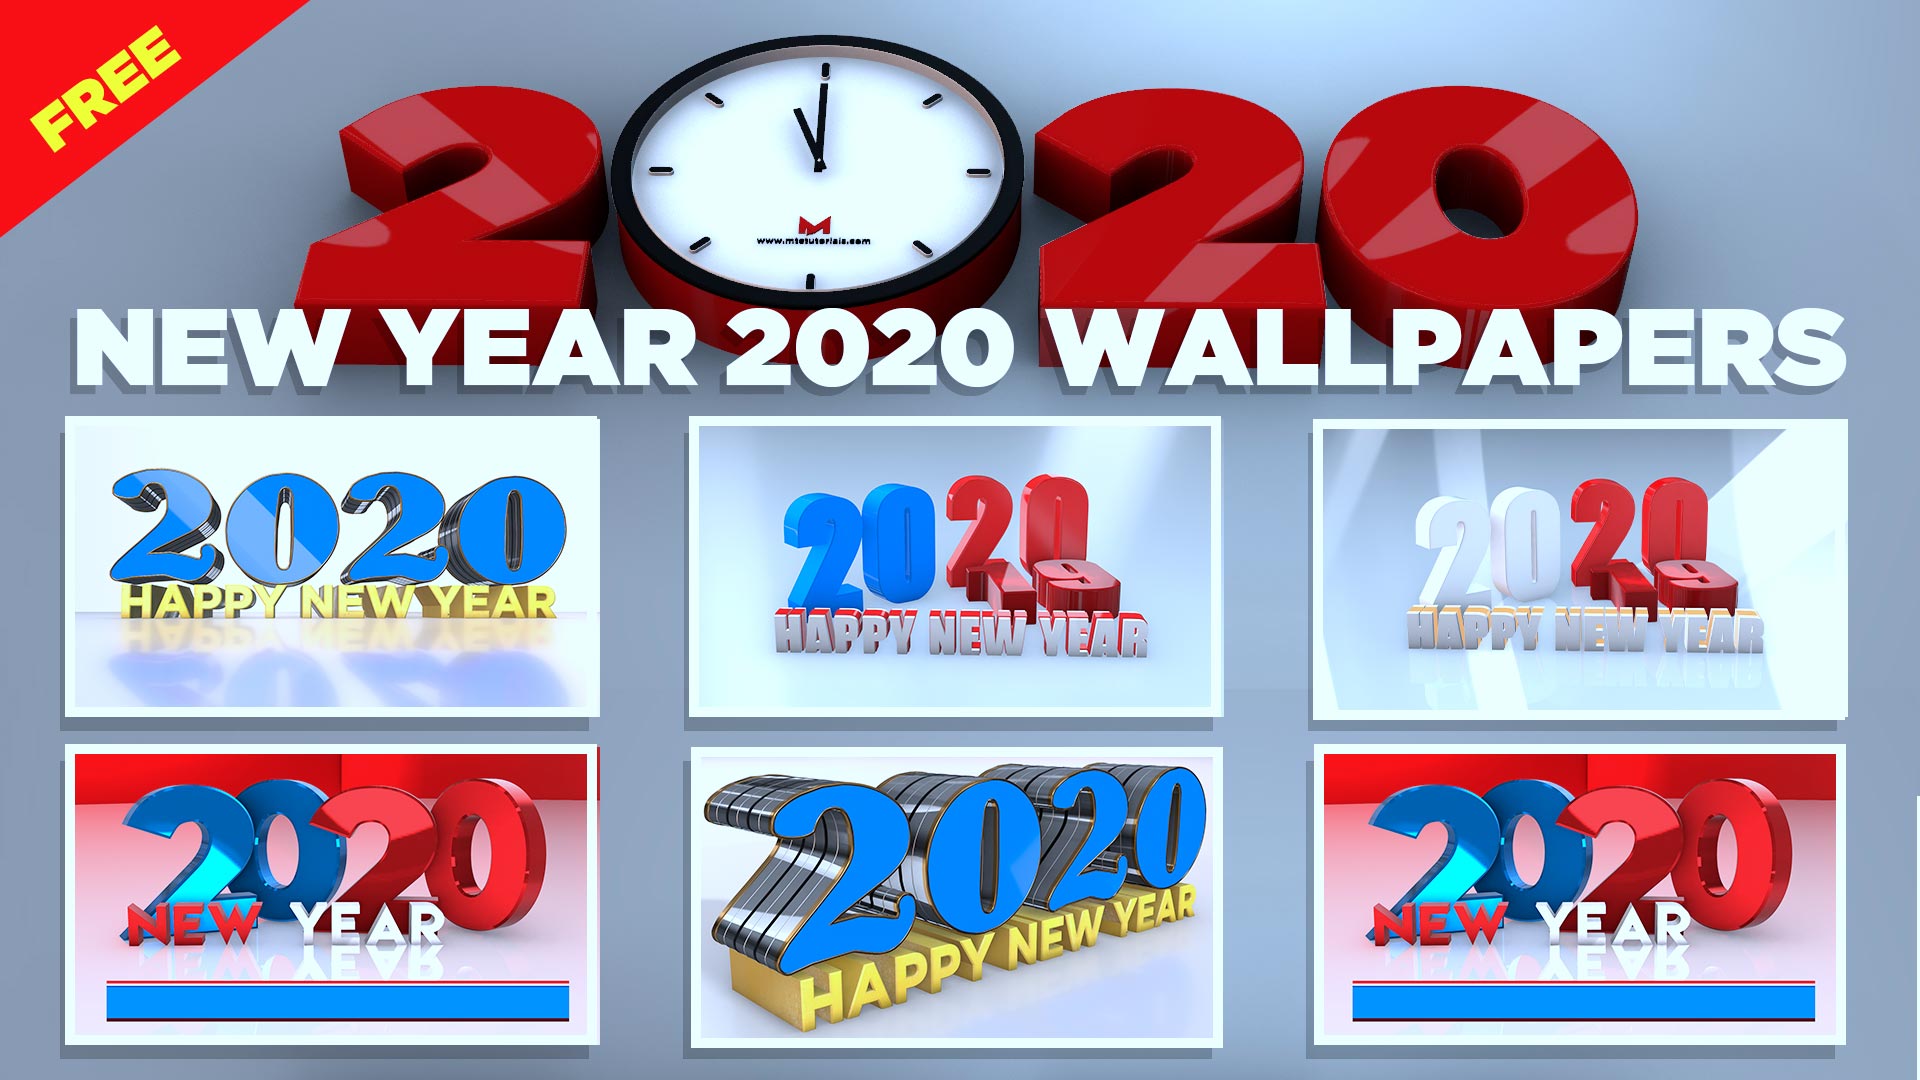 Download happy new year 2020 wallpapers images gallery free